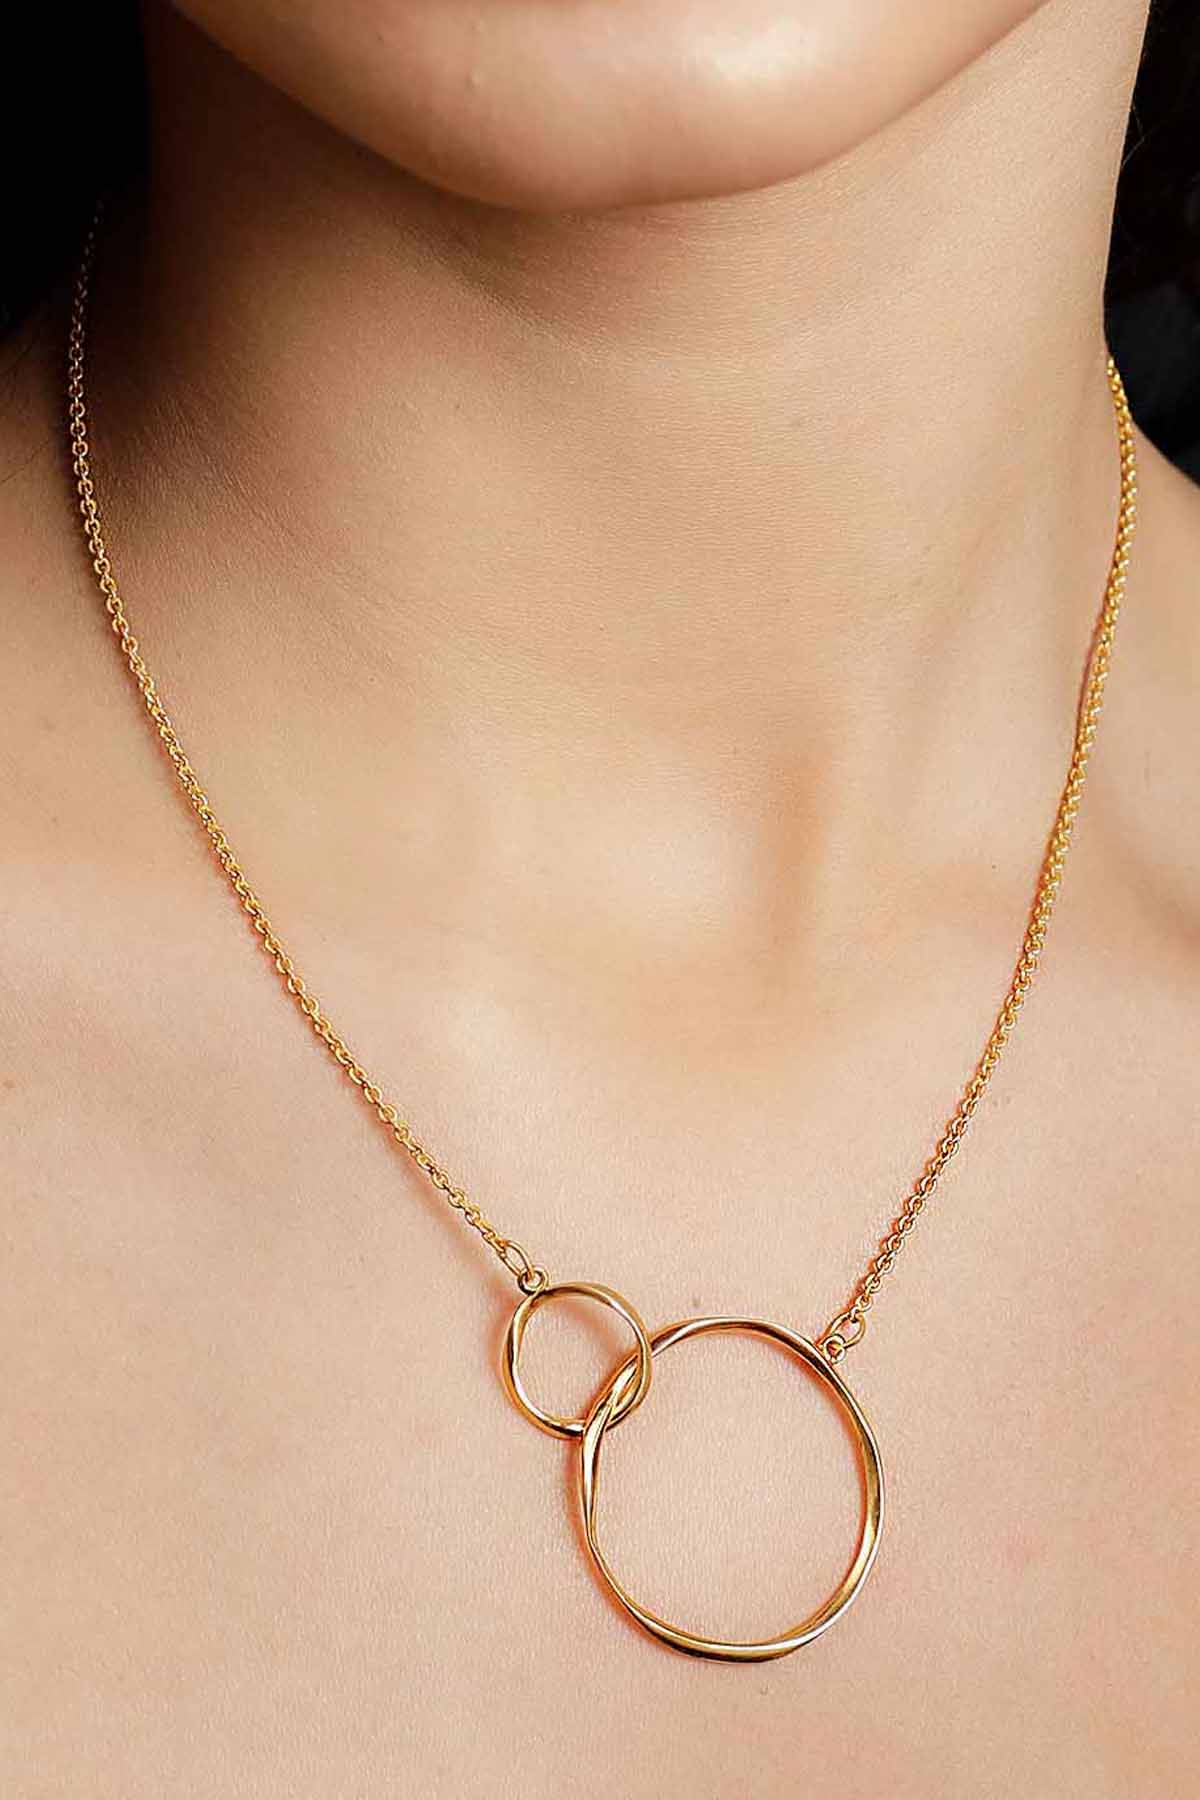 The Circlet Necklace